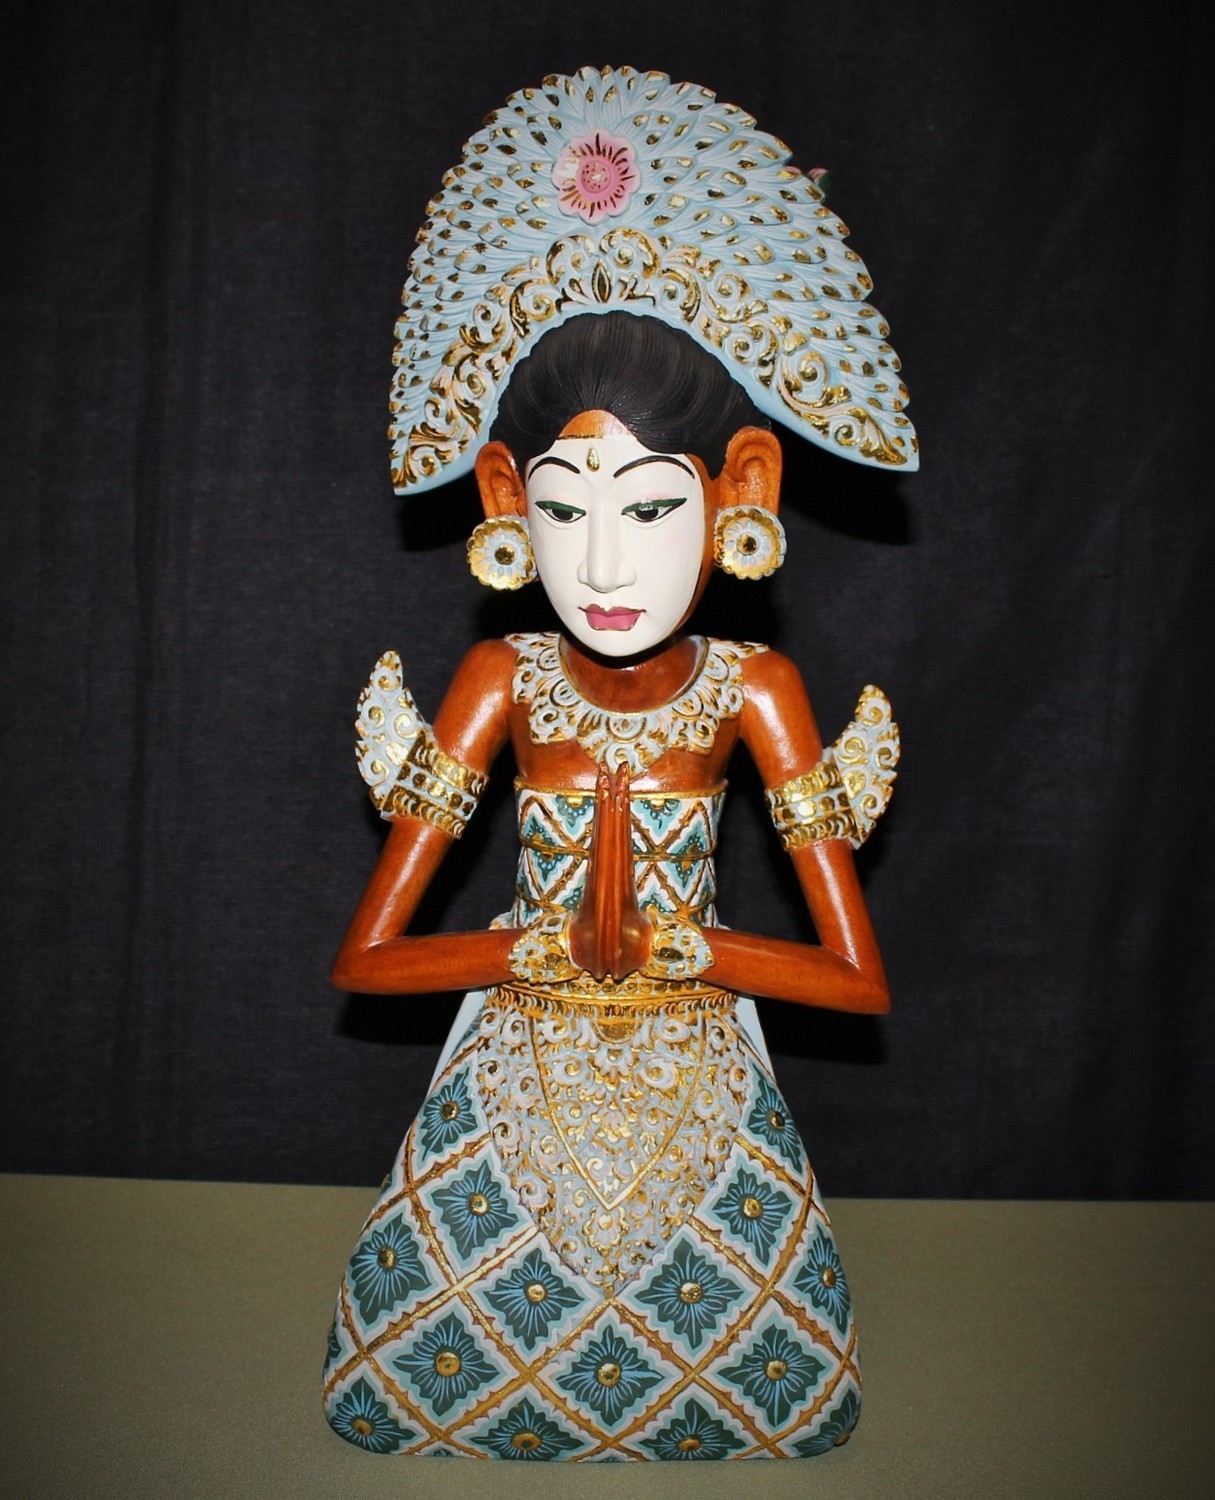 Vintage Goddess Figurine Statue Hand Carved Painted Balinese 21” Wood Sculpture